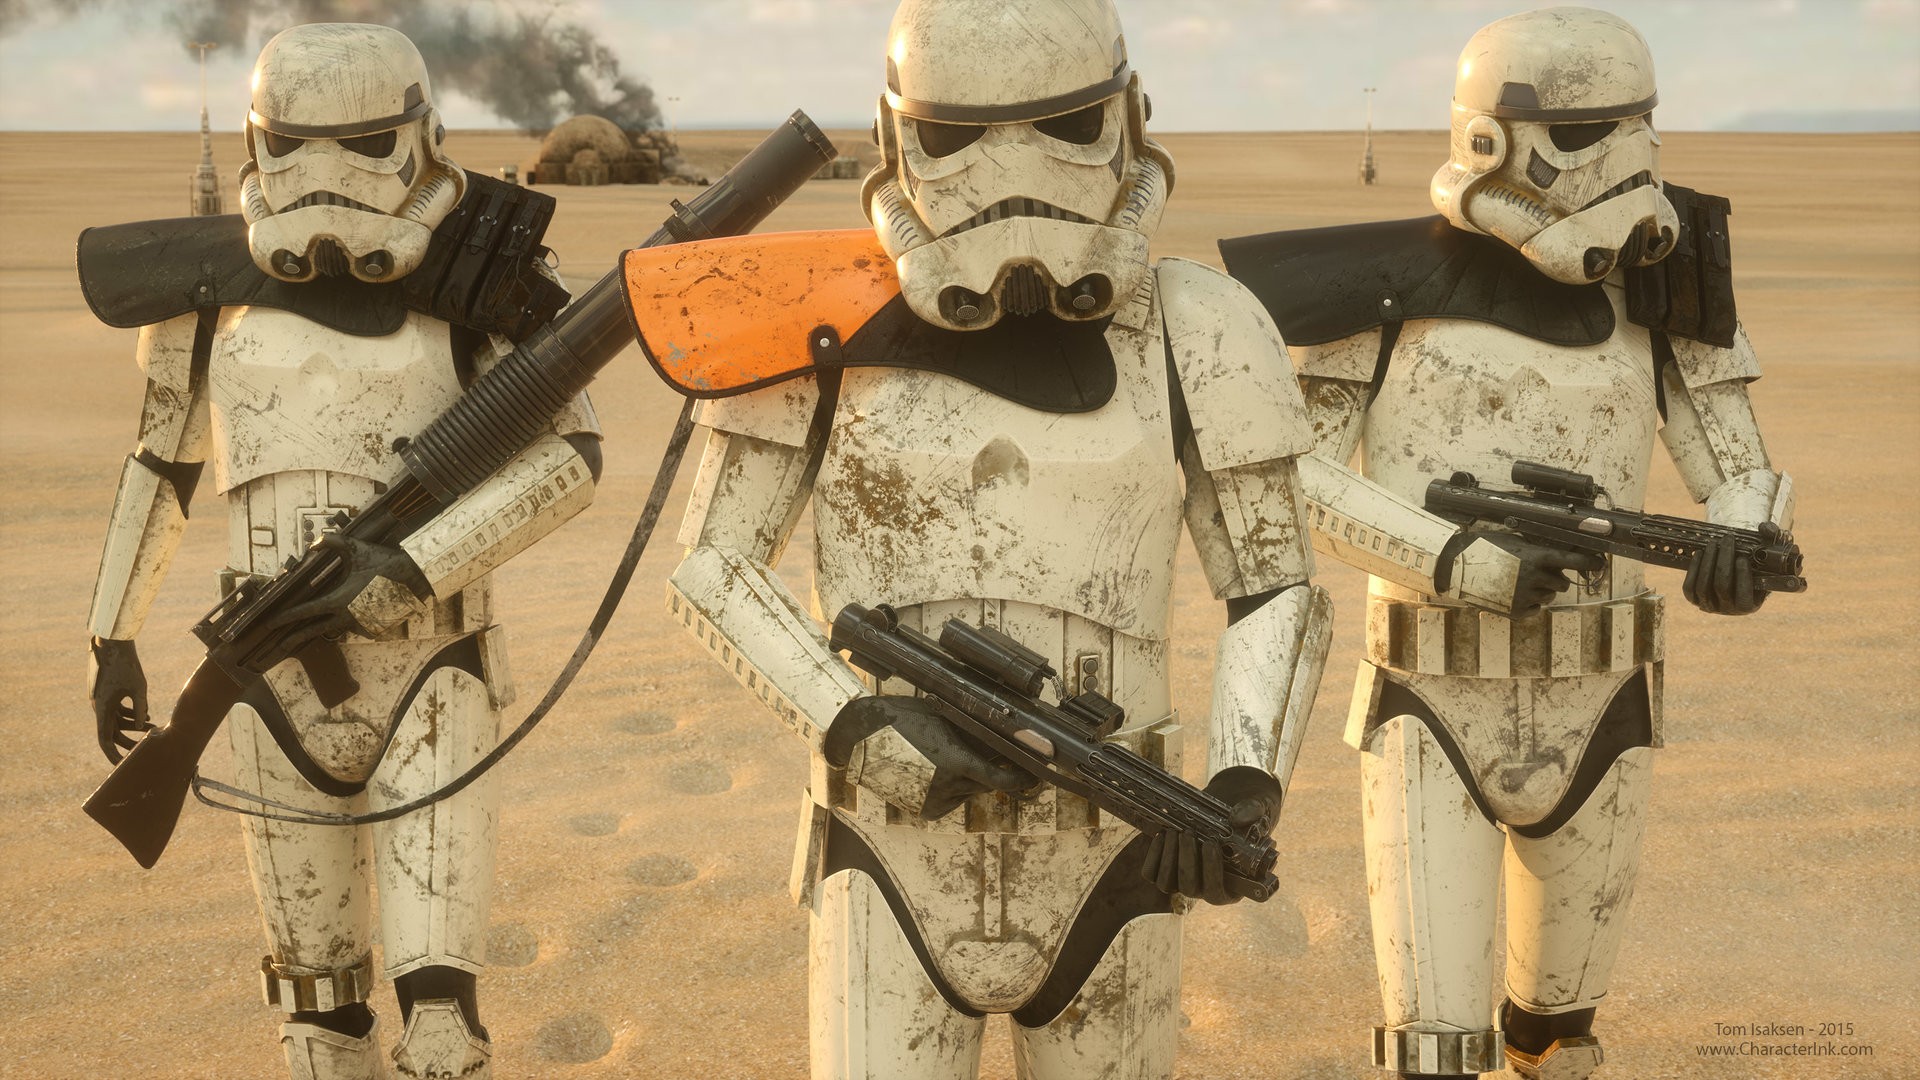 General 1920x1080 Star Wars movies Tatooine Imperial Forces soldier Sandtrooper science fiction blaster 2015 (Year)